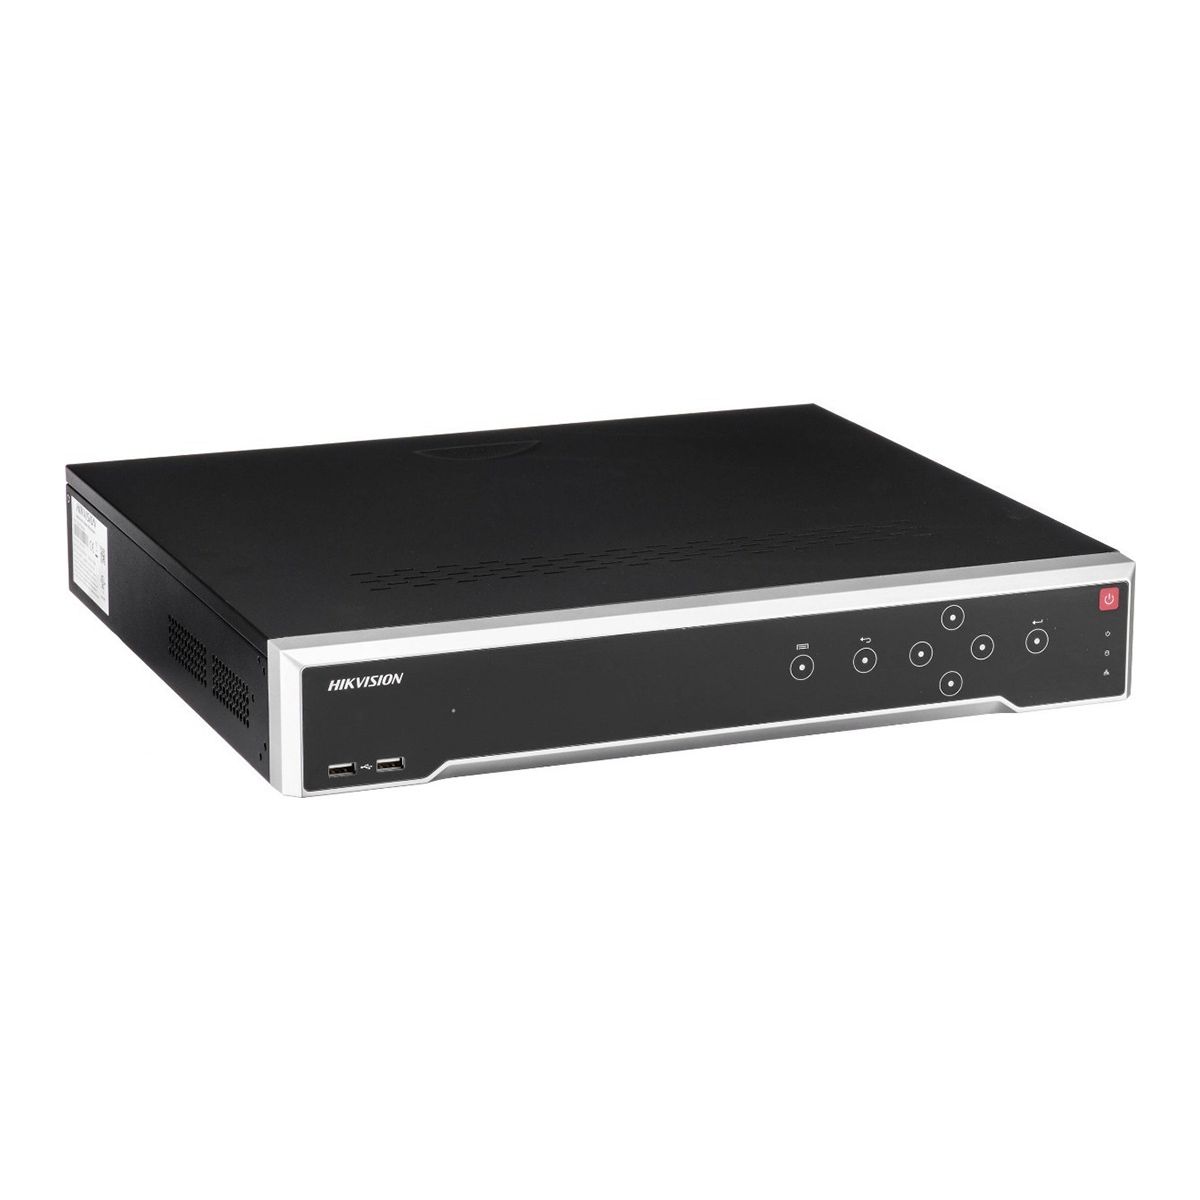 NVR Hikvision 32 canales DS-7732NI-I4/16P